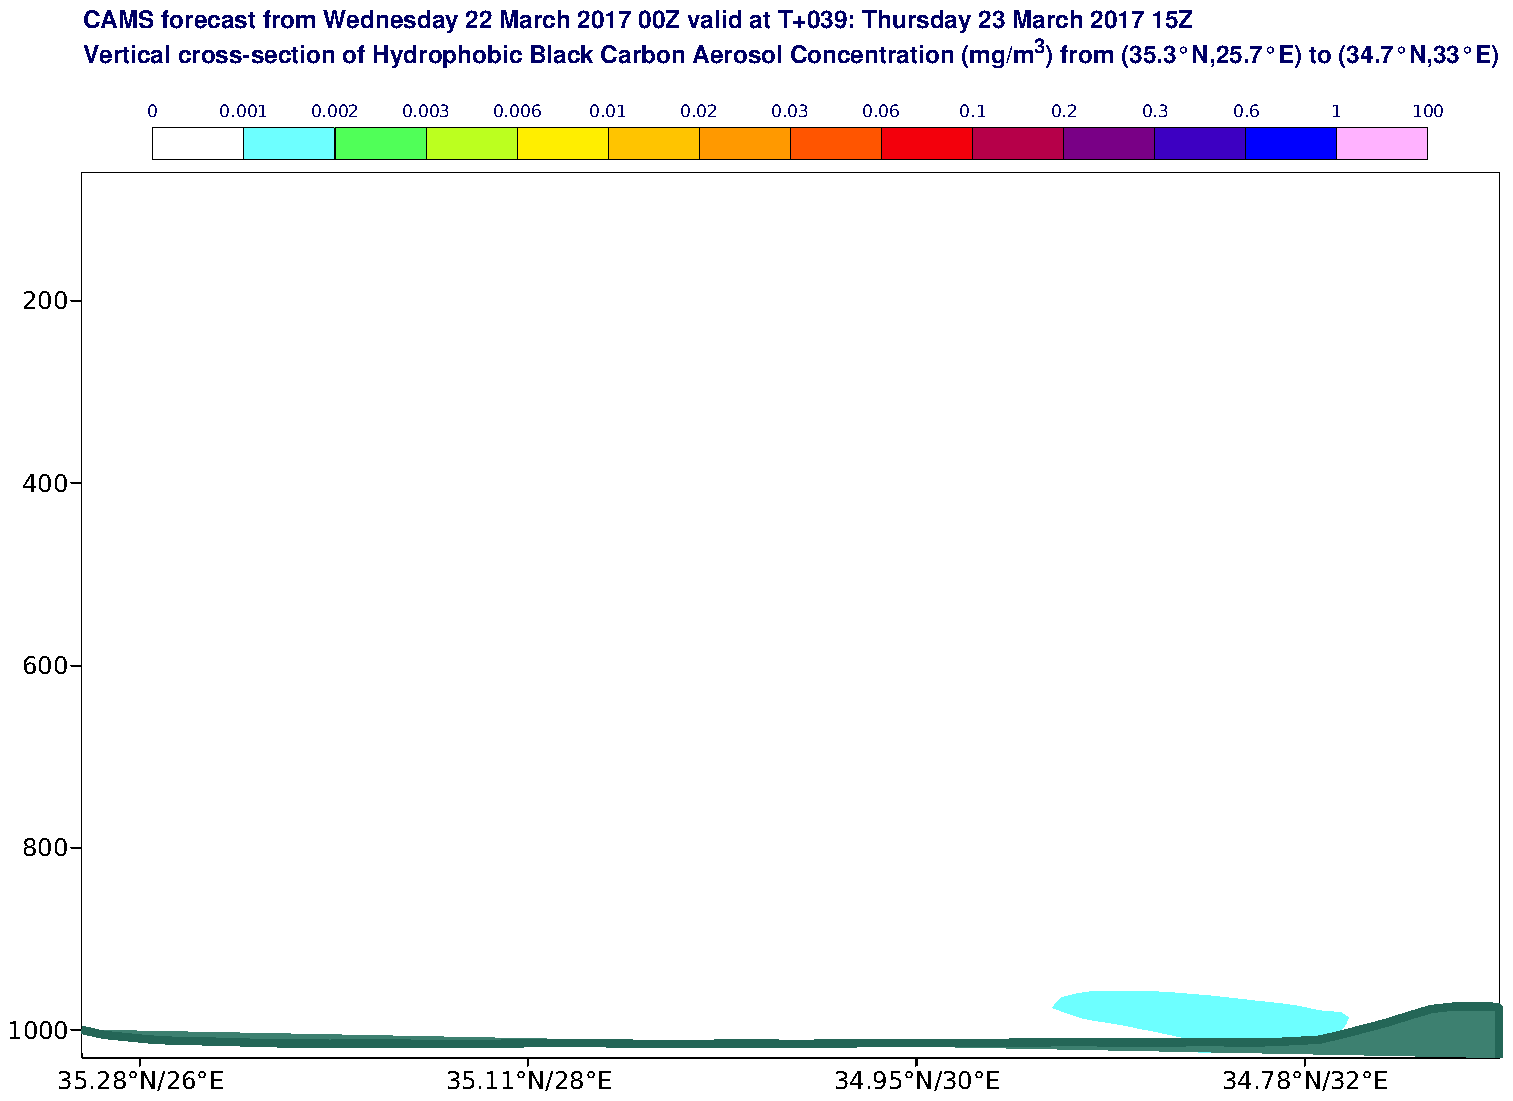 Vertical cross-section of Hydrophobic Black Carbon Aerosol Concentration (mg/m3) valid at T39 - 2017-03-23 15:00